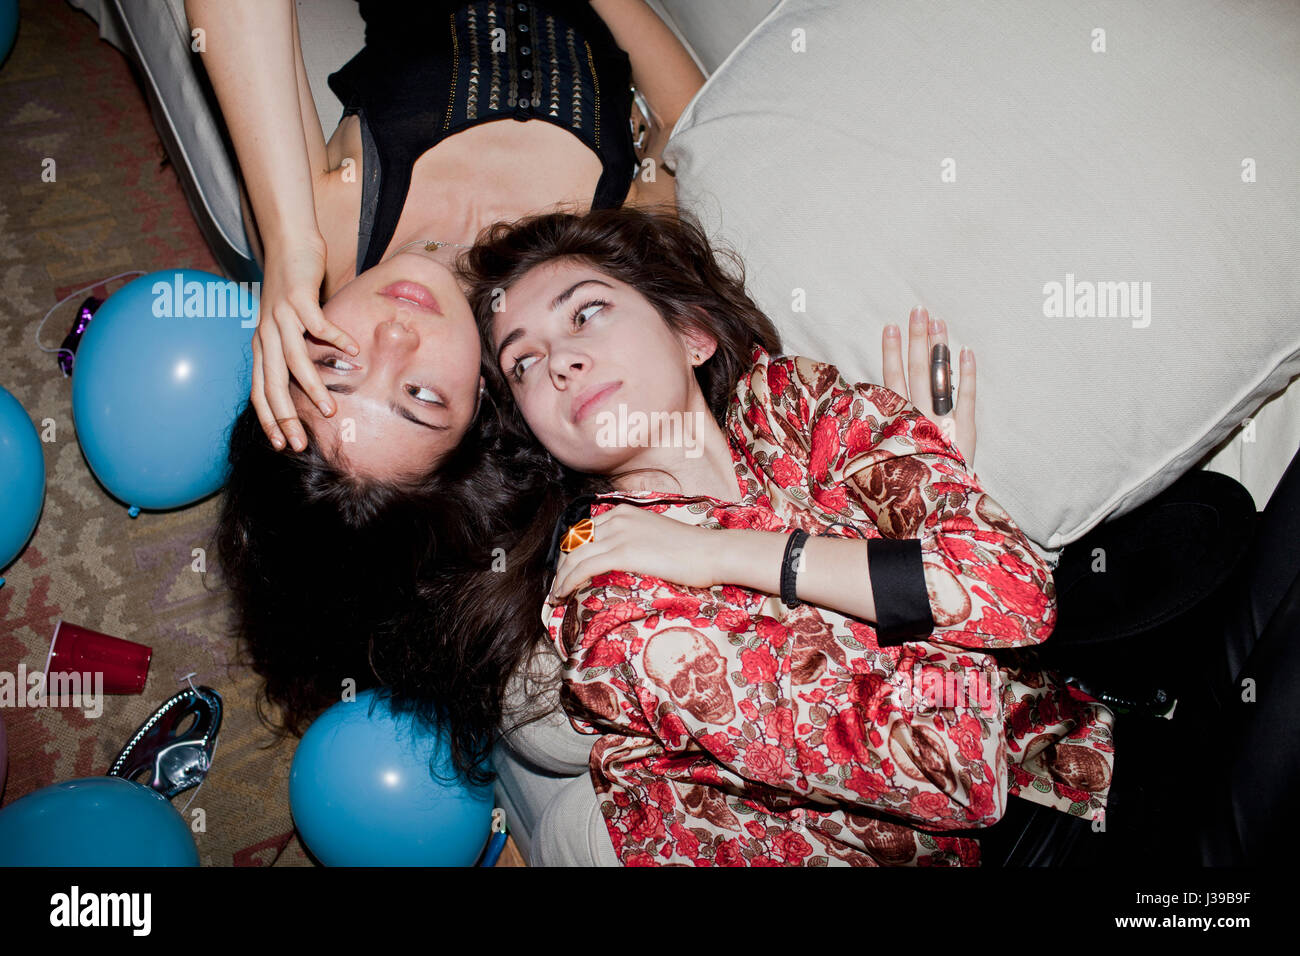 Young women at a party Stock Photo